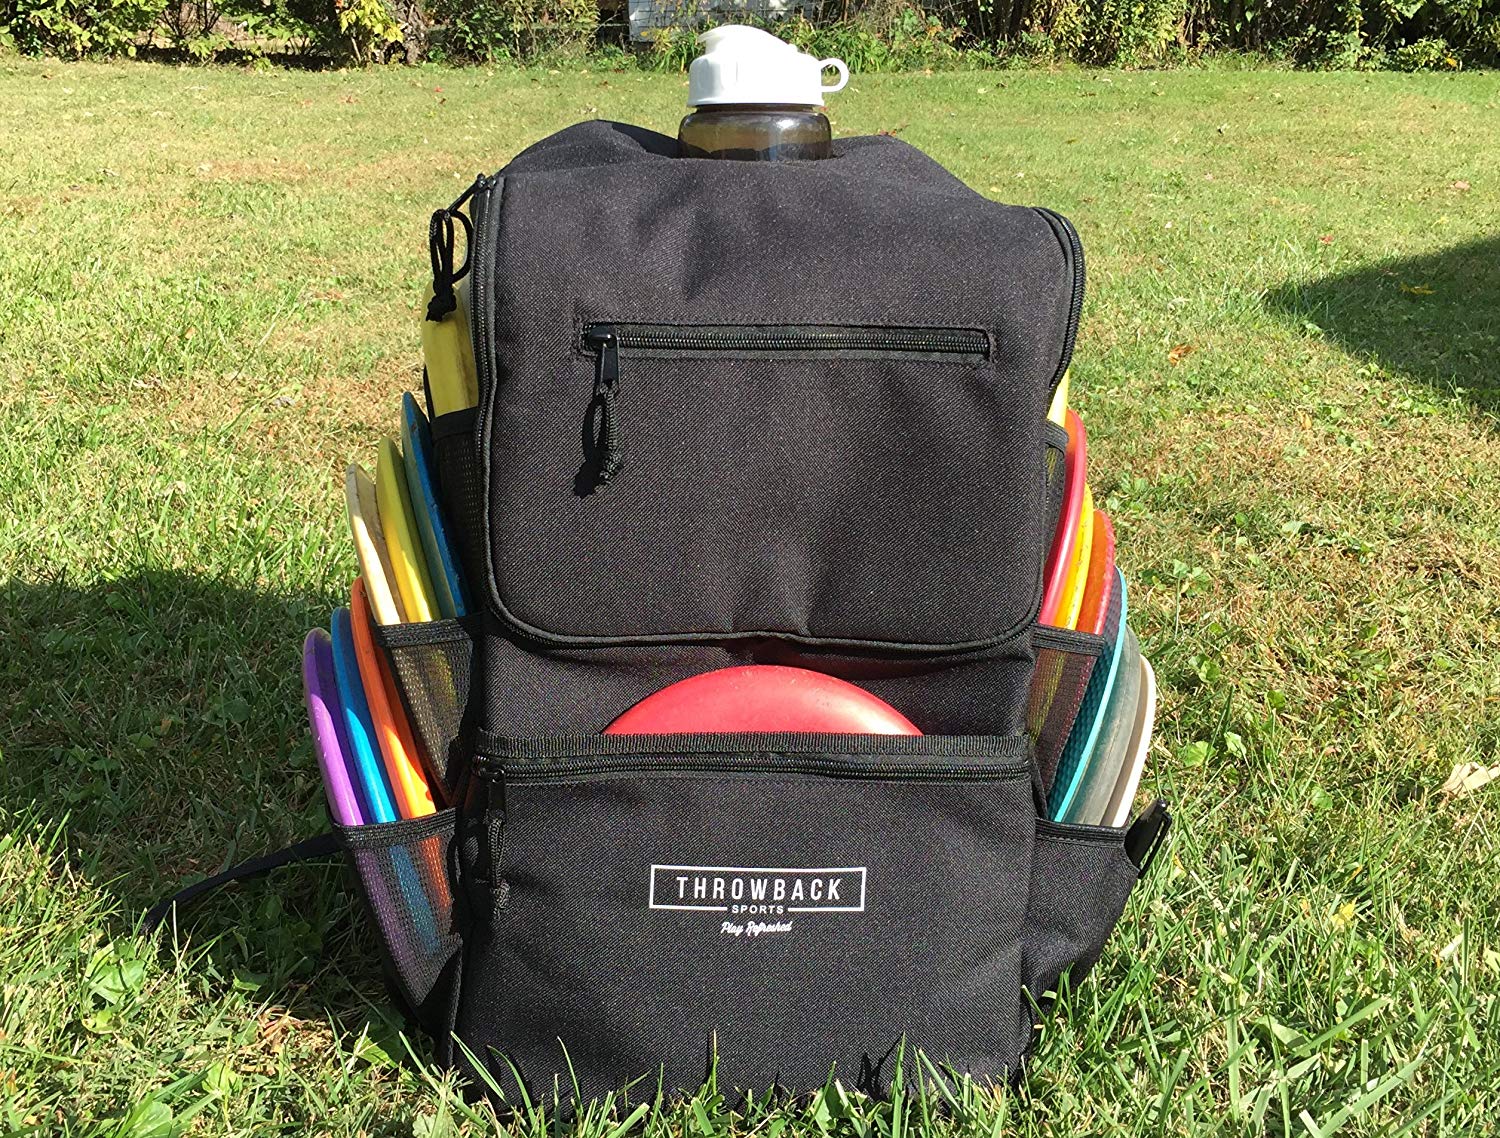 Throwback All Day Pack - Disc Golf Backpack with Oversize Cooler Built-in - Frisbee Disc Golf Bag with 16 Disc Capacity